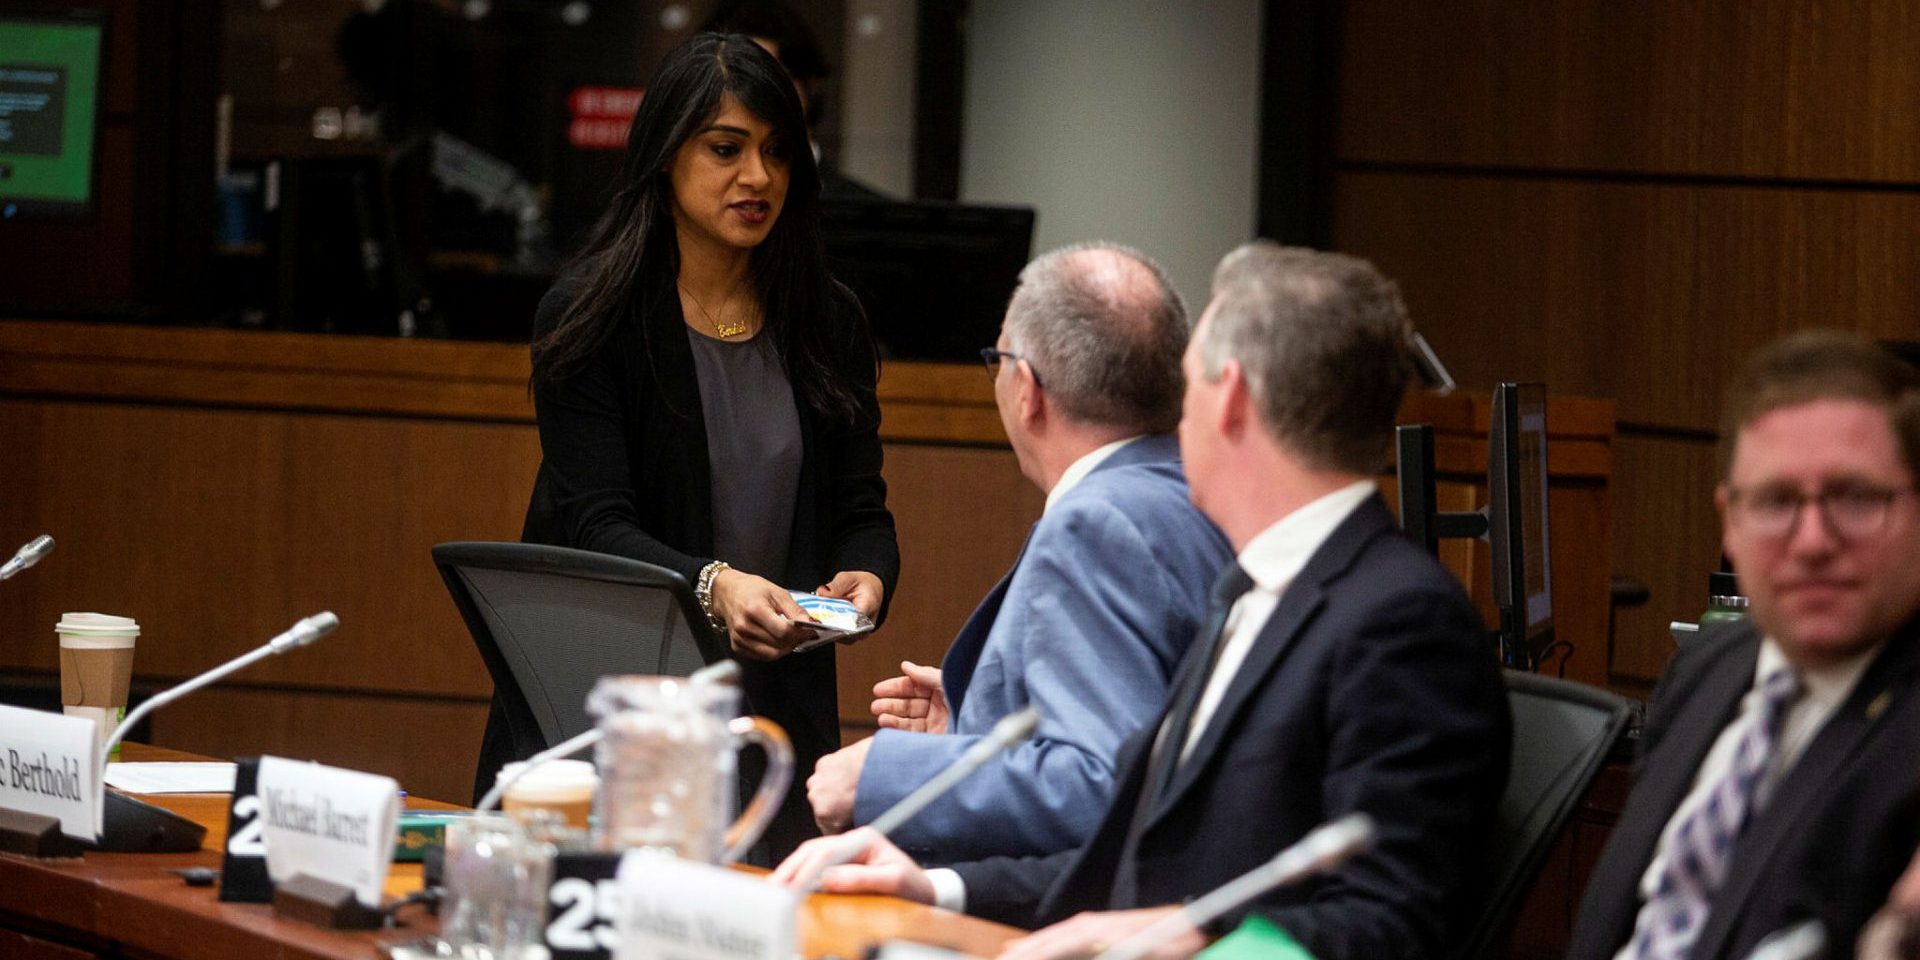 Liberal MP Bardish Chagger, left, speaks with Conservative MP Luc Berthold before the Standing Committee on Procedure and House Affairs meeting in West Block on March 21 to continue the committee’s study on foreign election interference. The Hill Times photograph by Andrew Meade